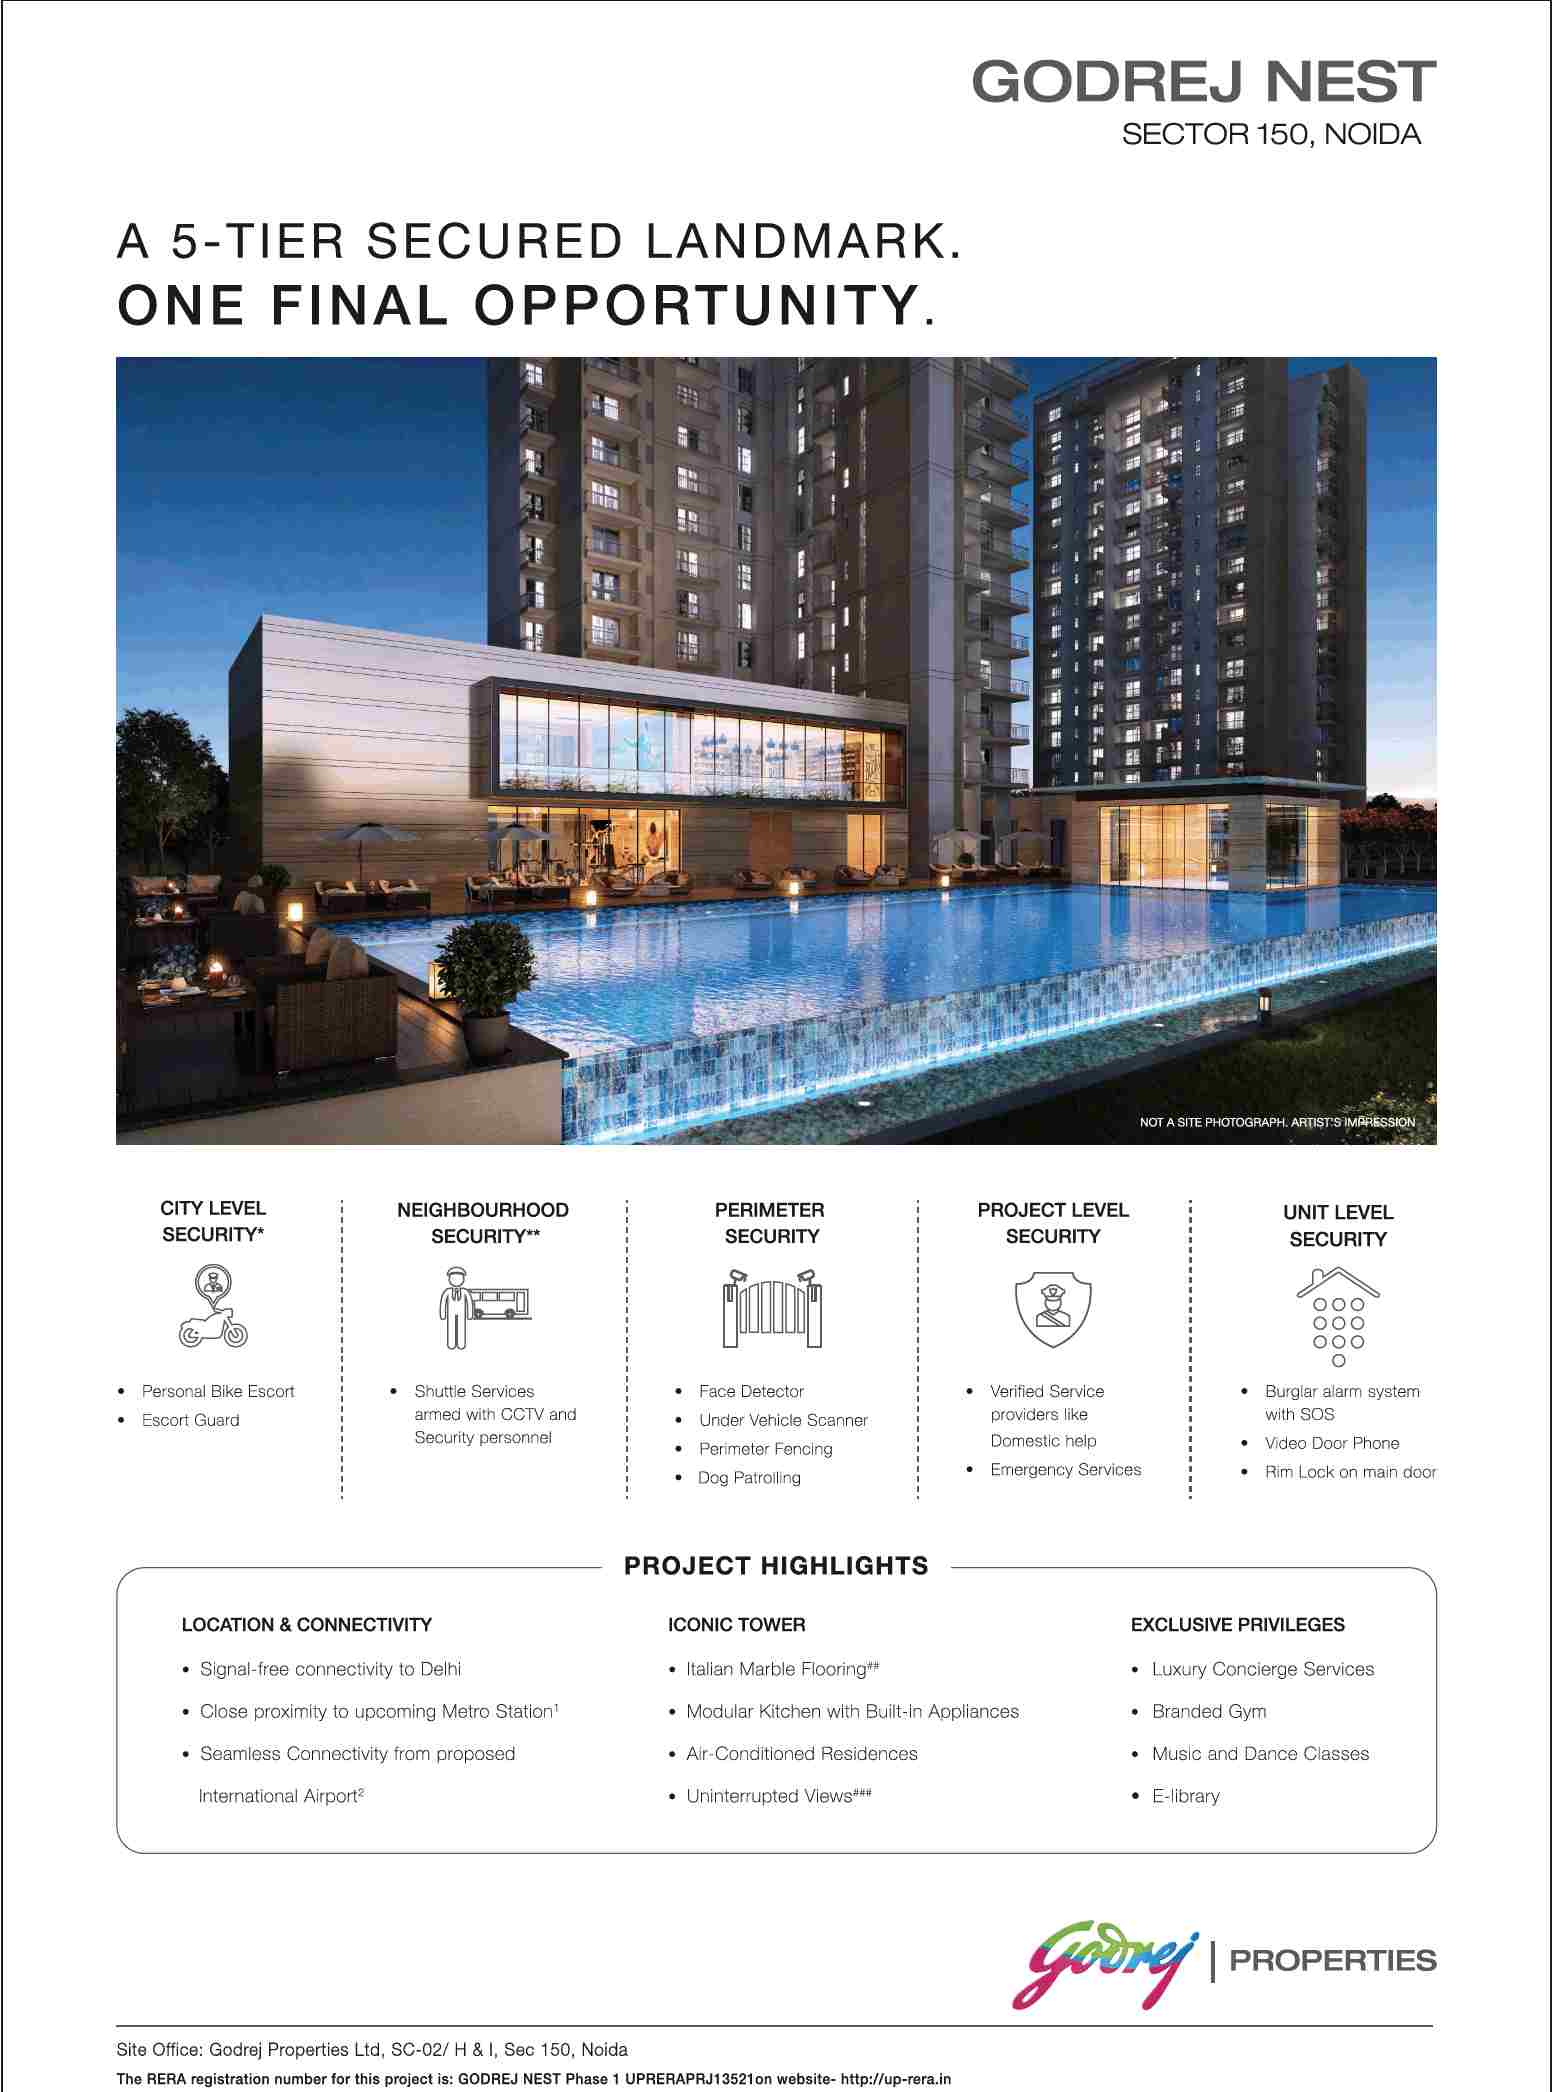 One final opportunity to live in 5 tier secured landmark at Godrej Nest in Noida Update